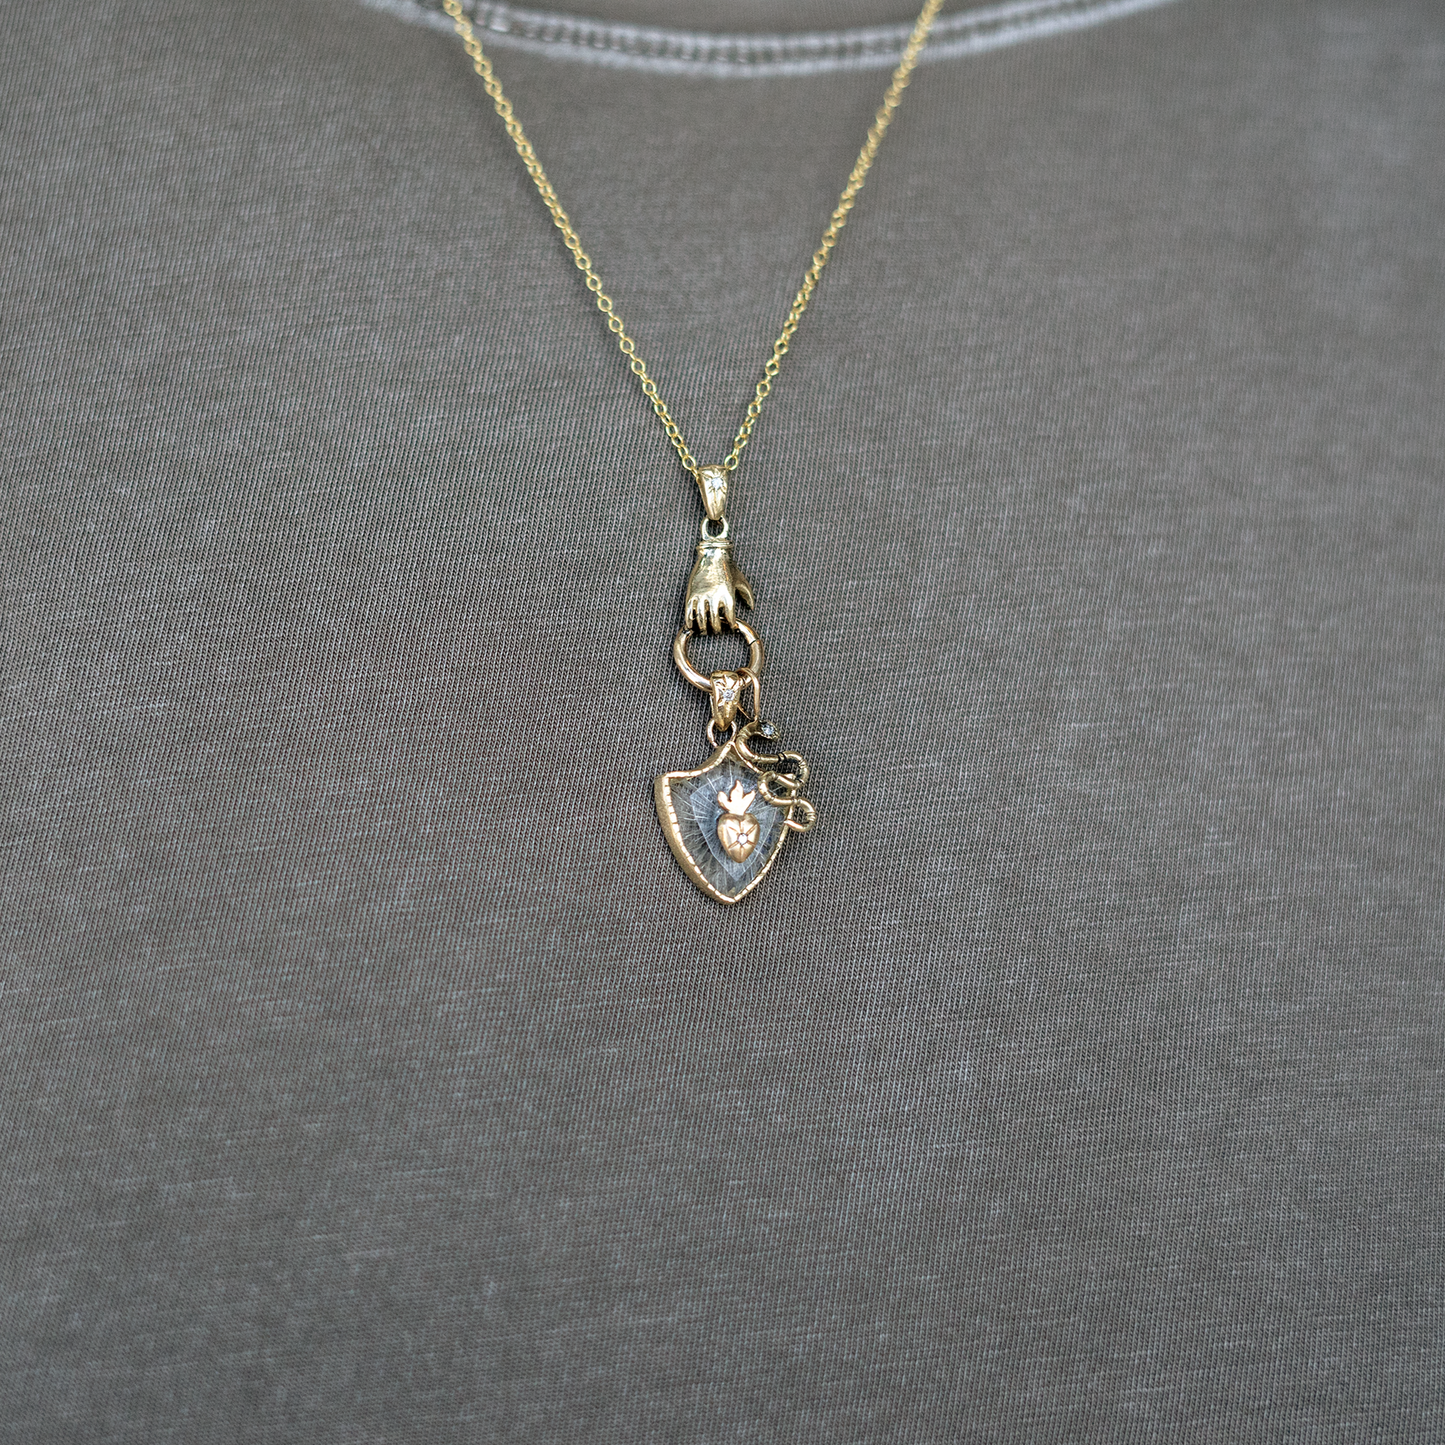 Single Hand Necklace in Gold